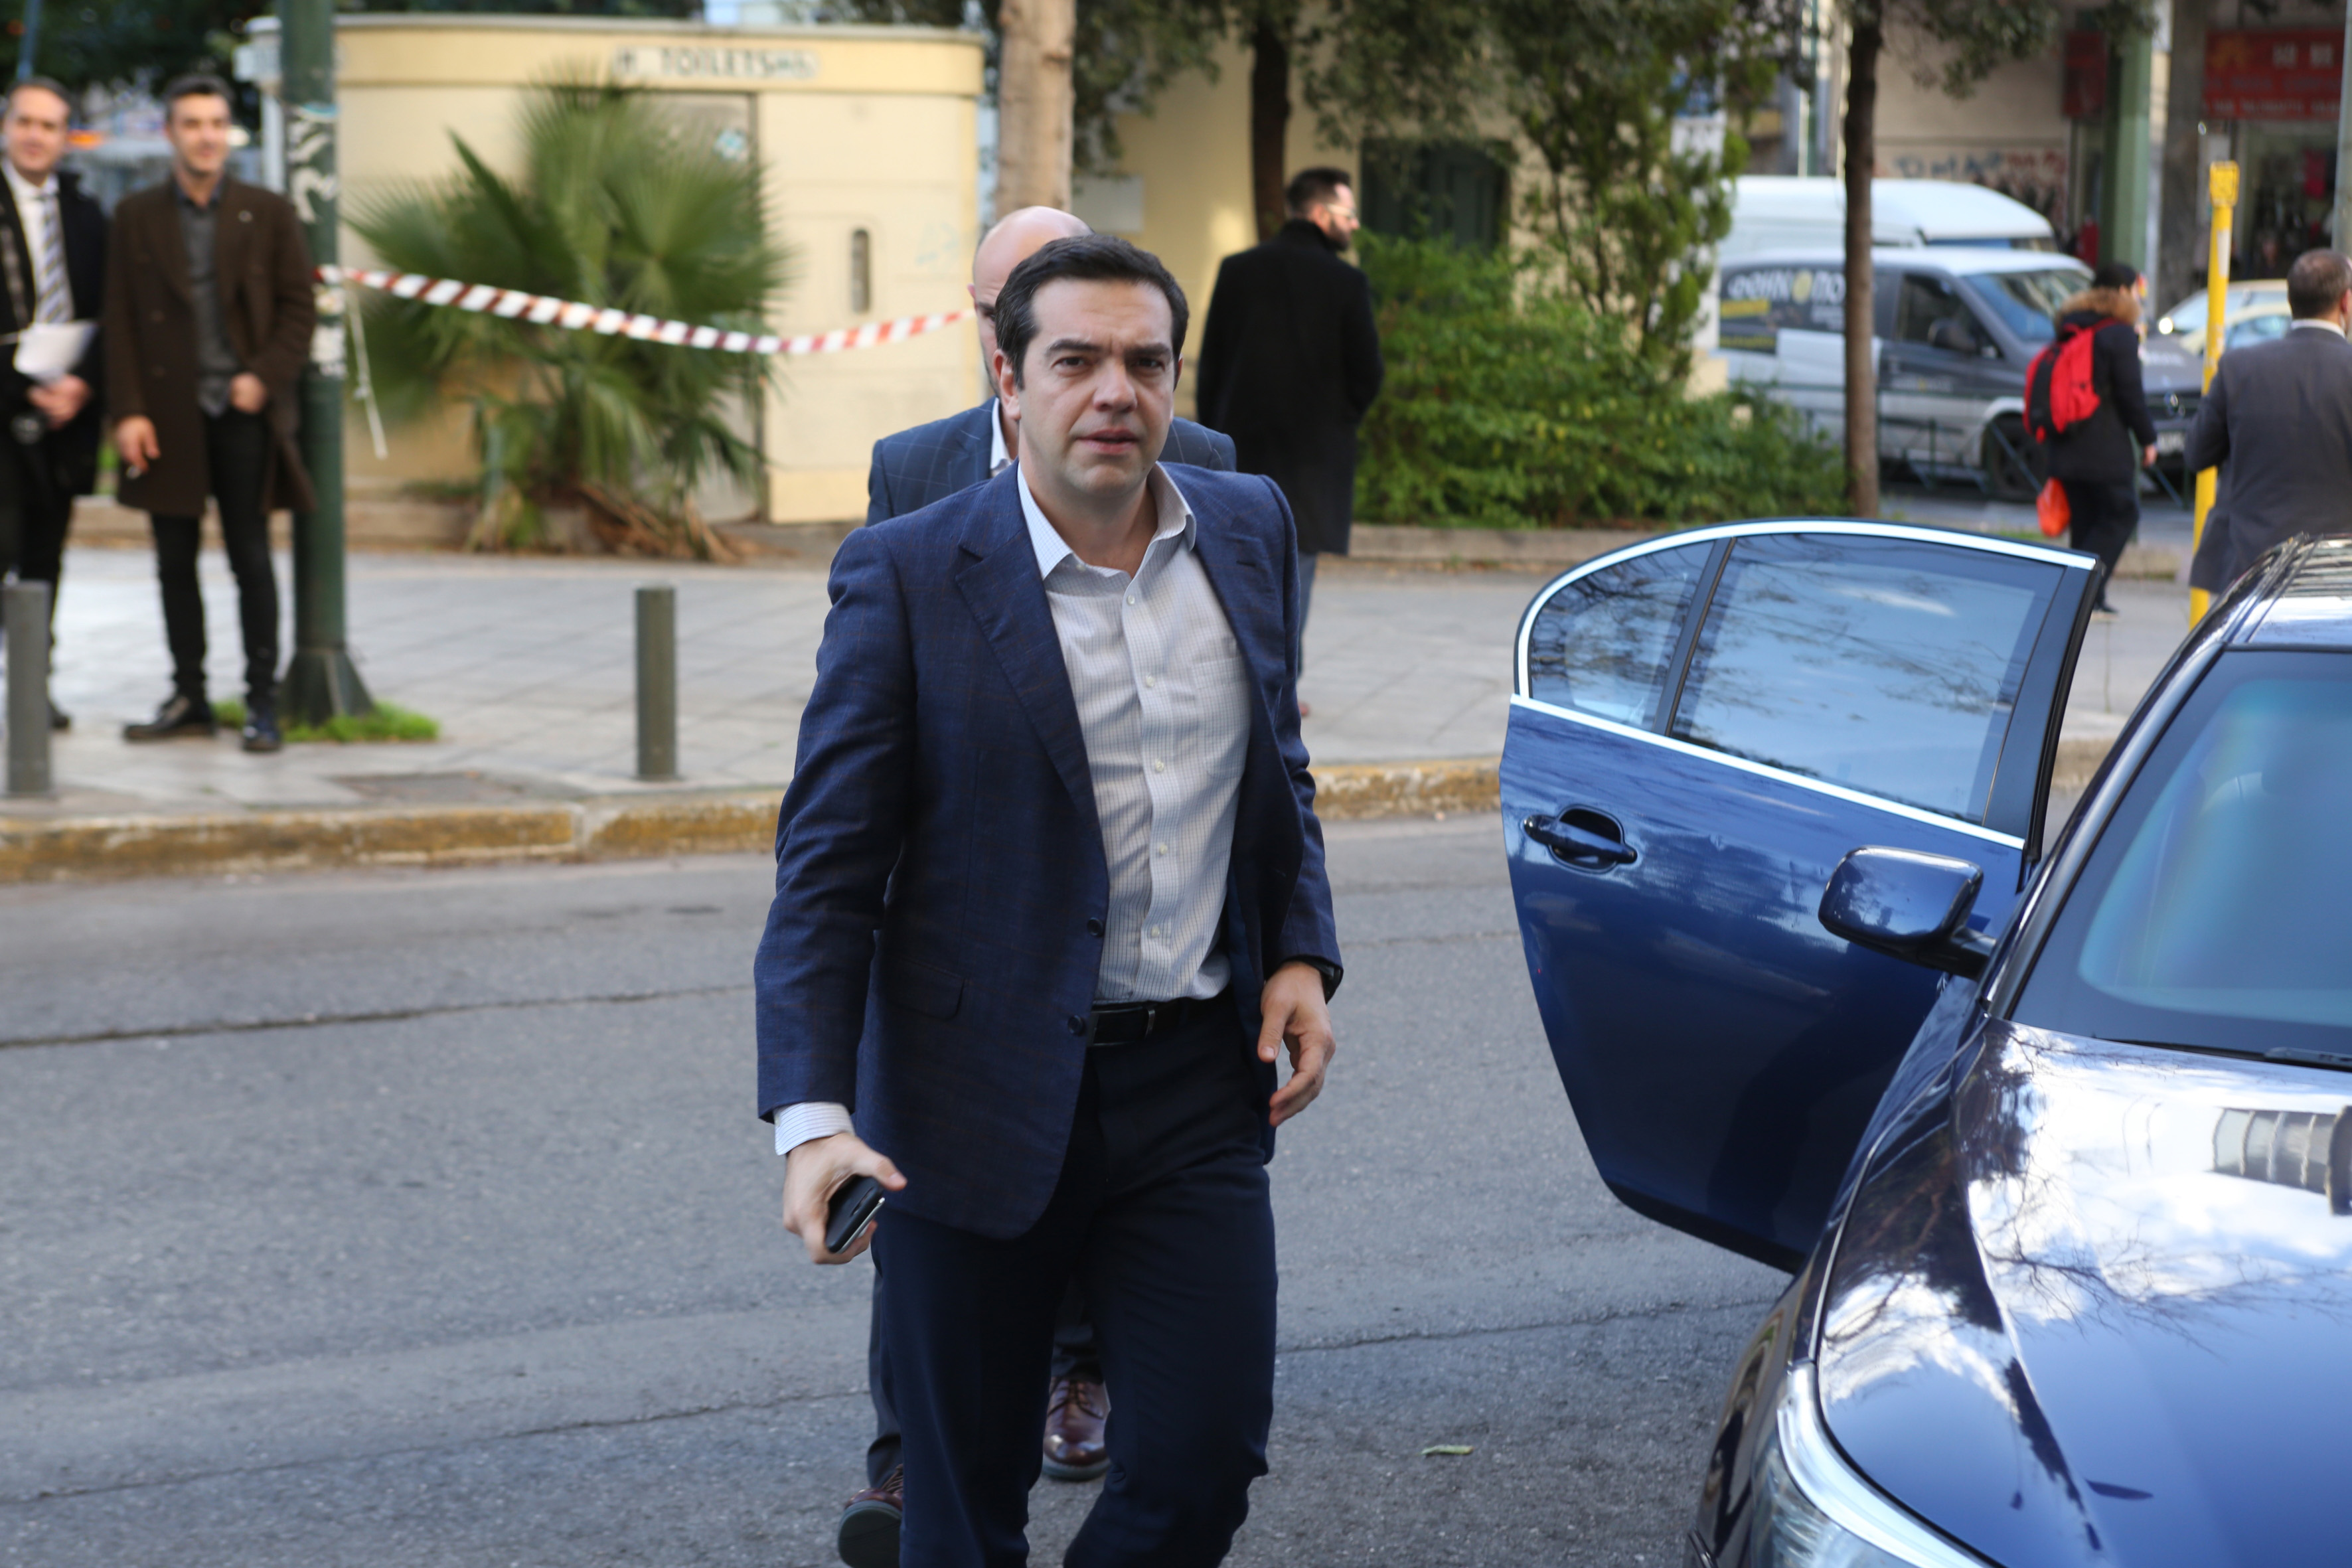 New austerity law, foreign policy challenges rattle Syriza